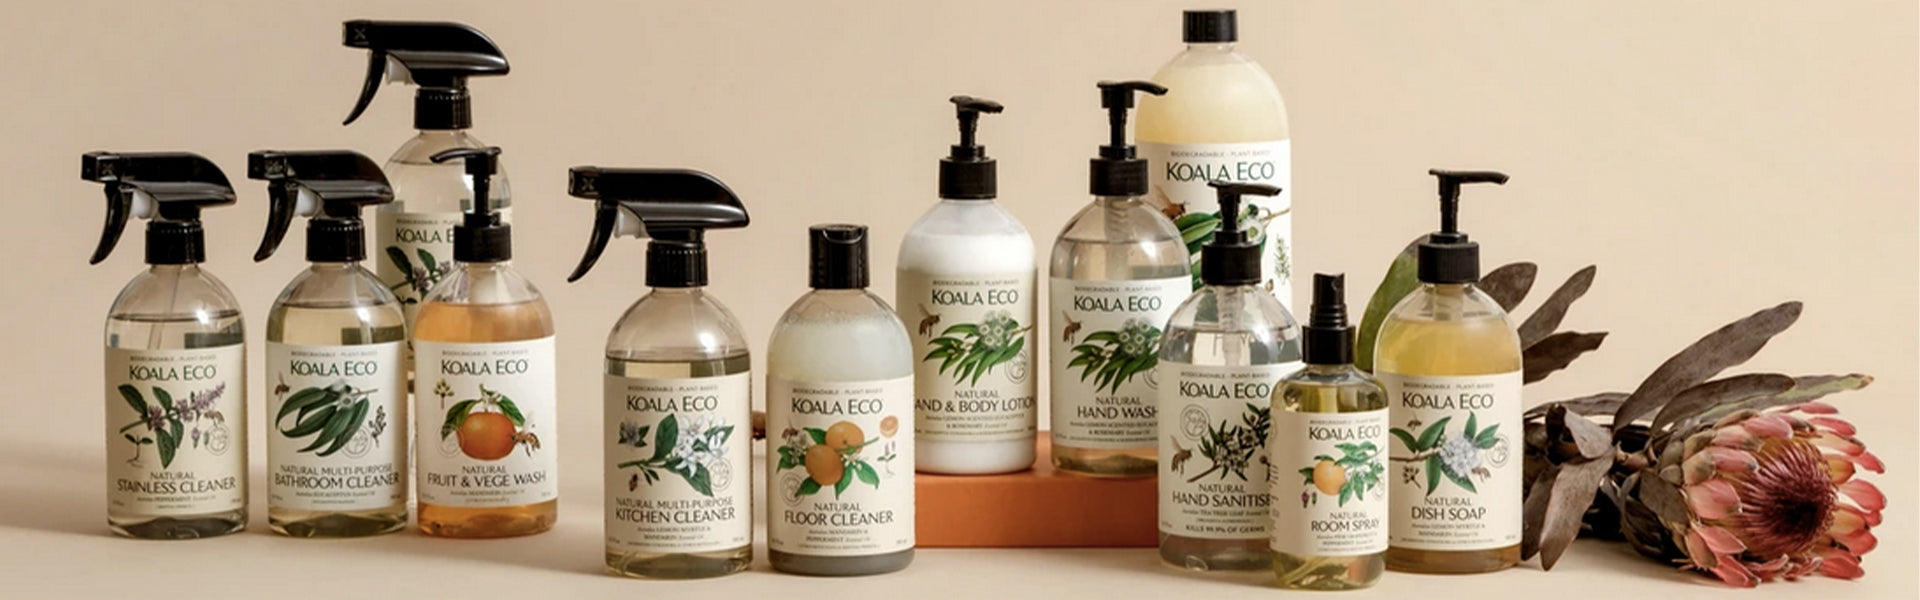 Koala_Eco_Natural_Non_Toxic_Cleaning_Products